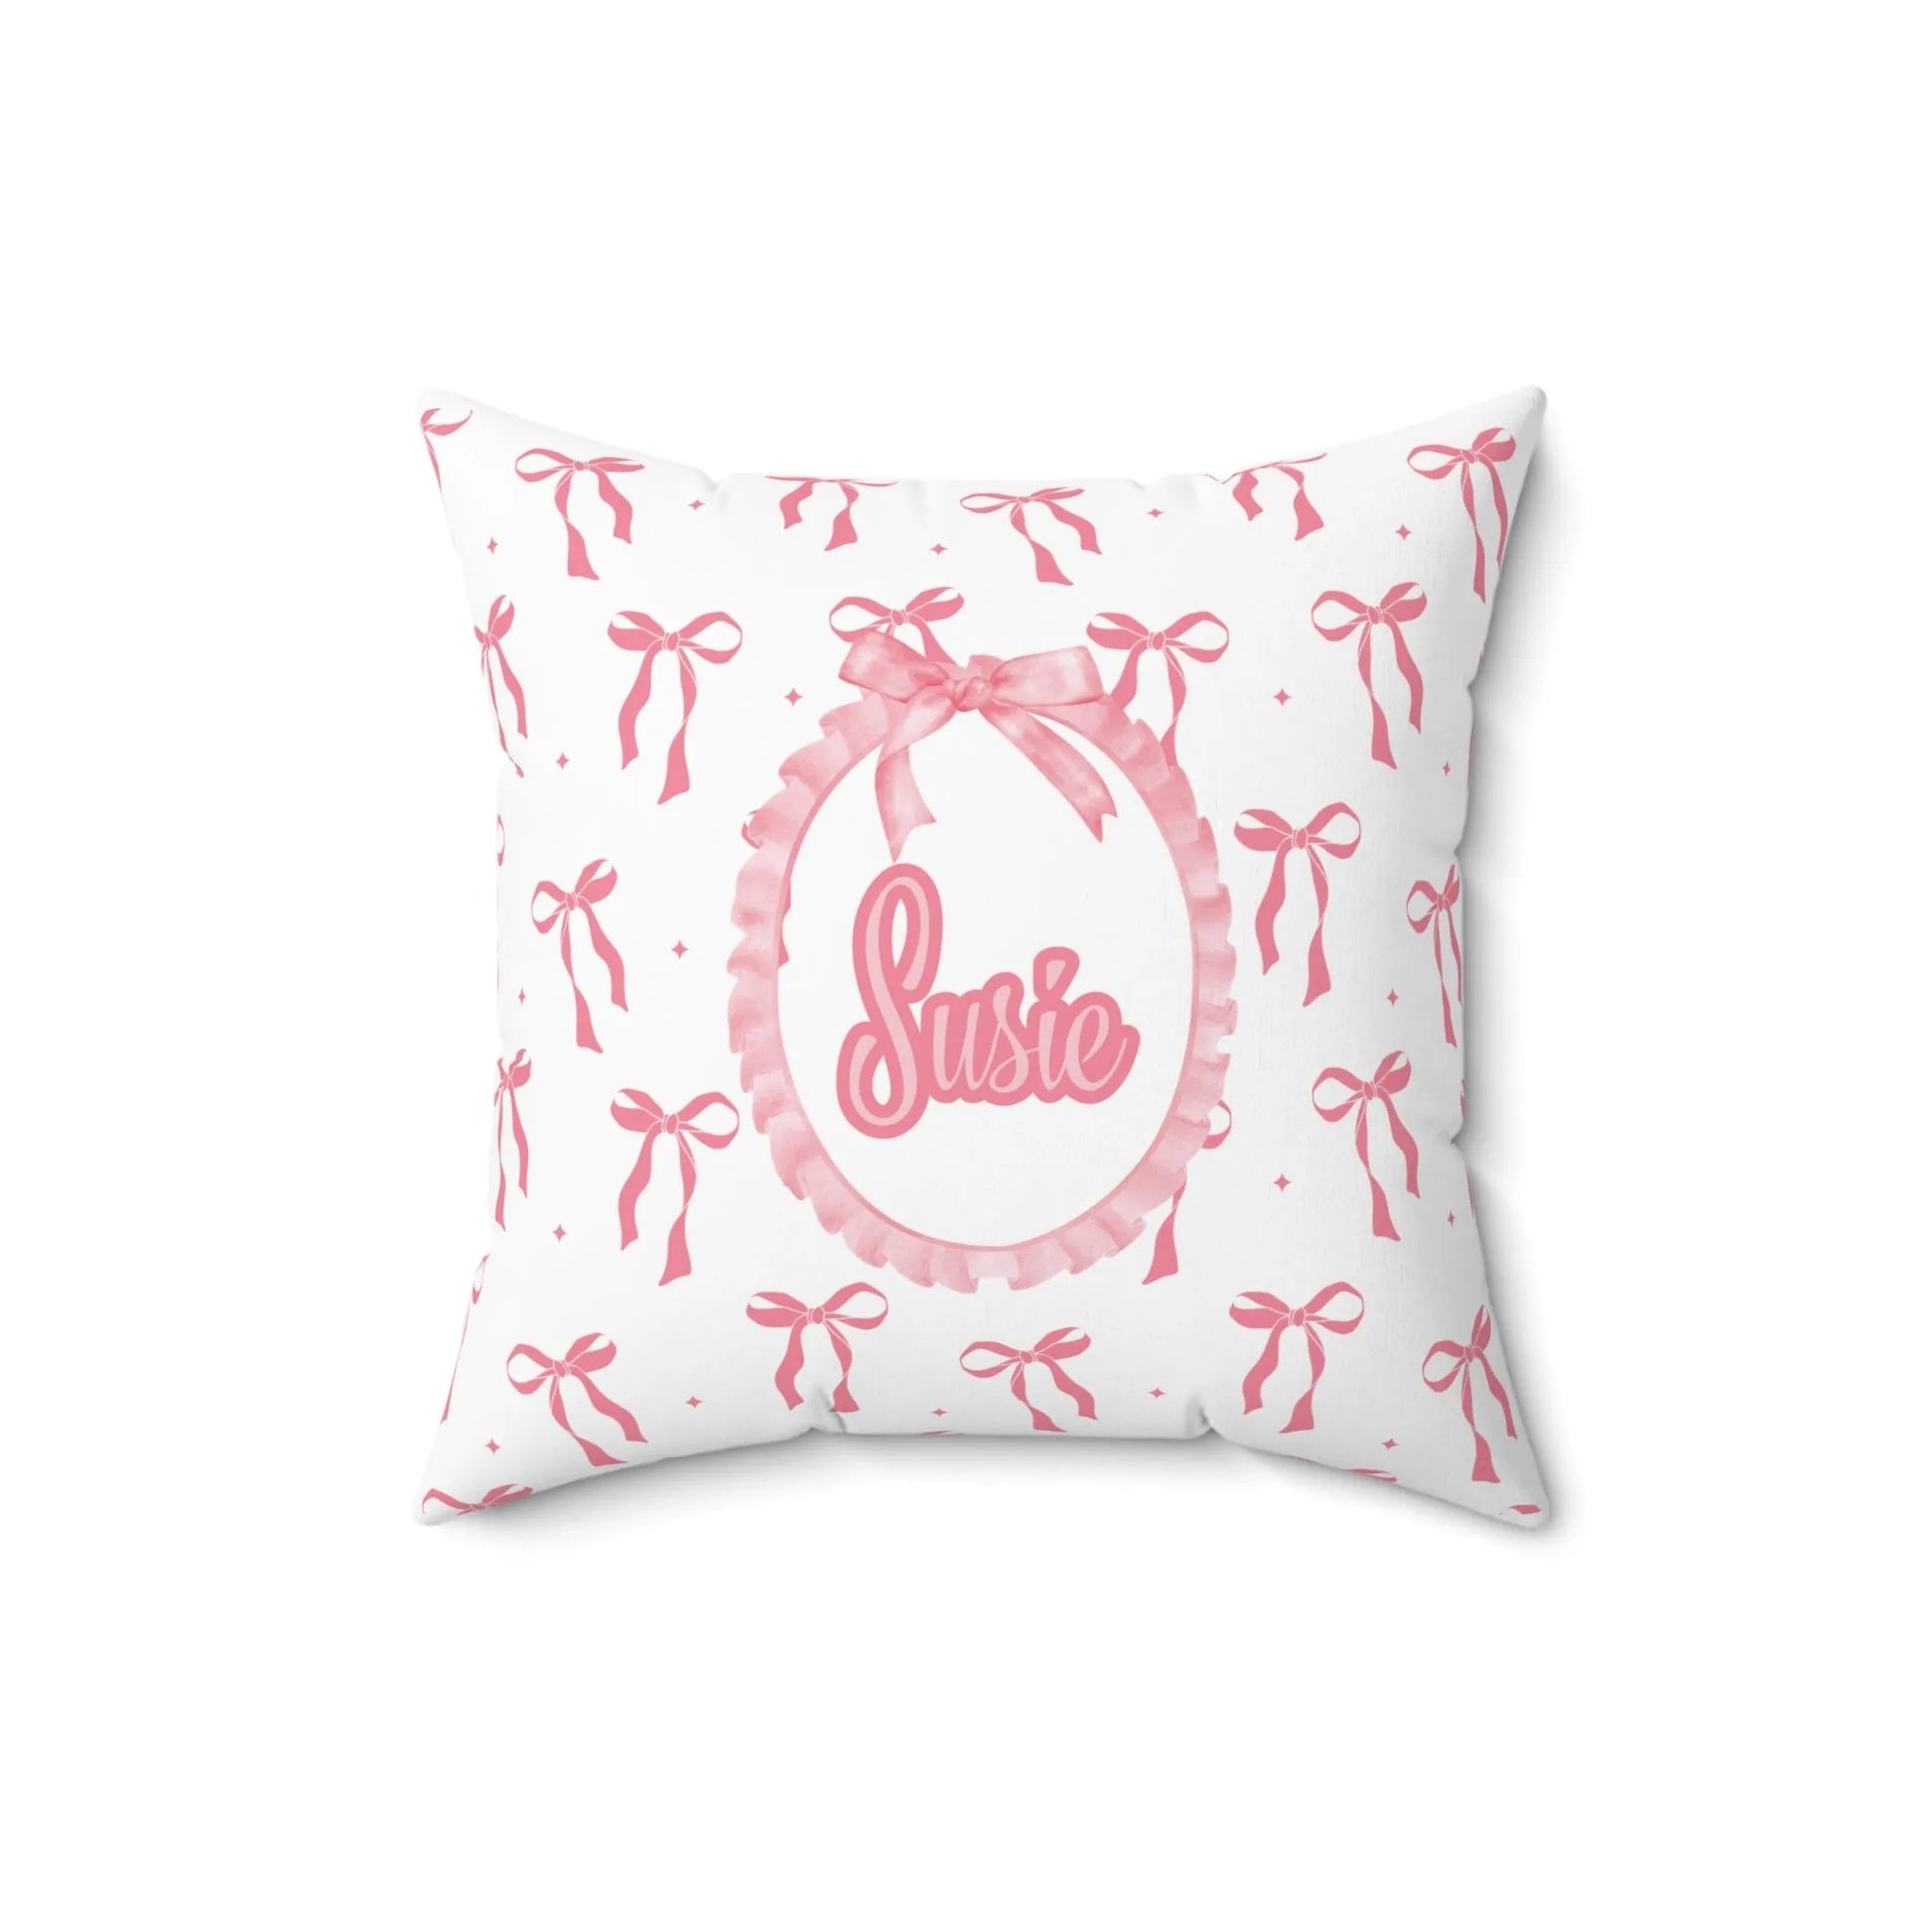 Coquette Bows Custom Name Spun Polyester Square Pillow - Pink Coquette Home Decor - Coquette Aesthetic Throw Pillow